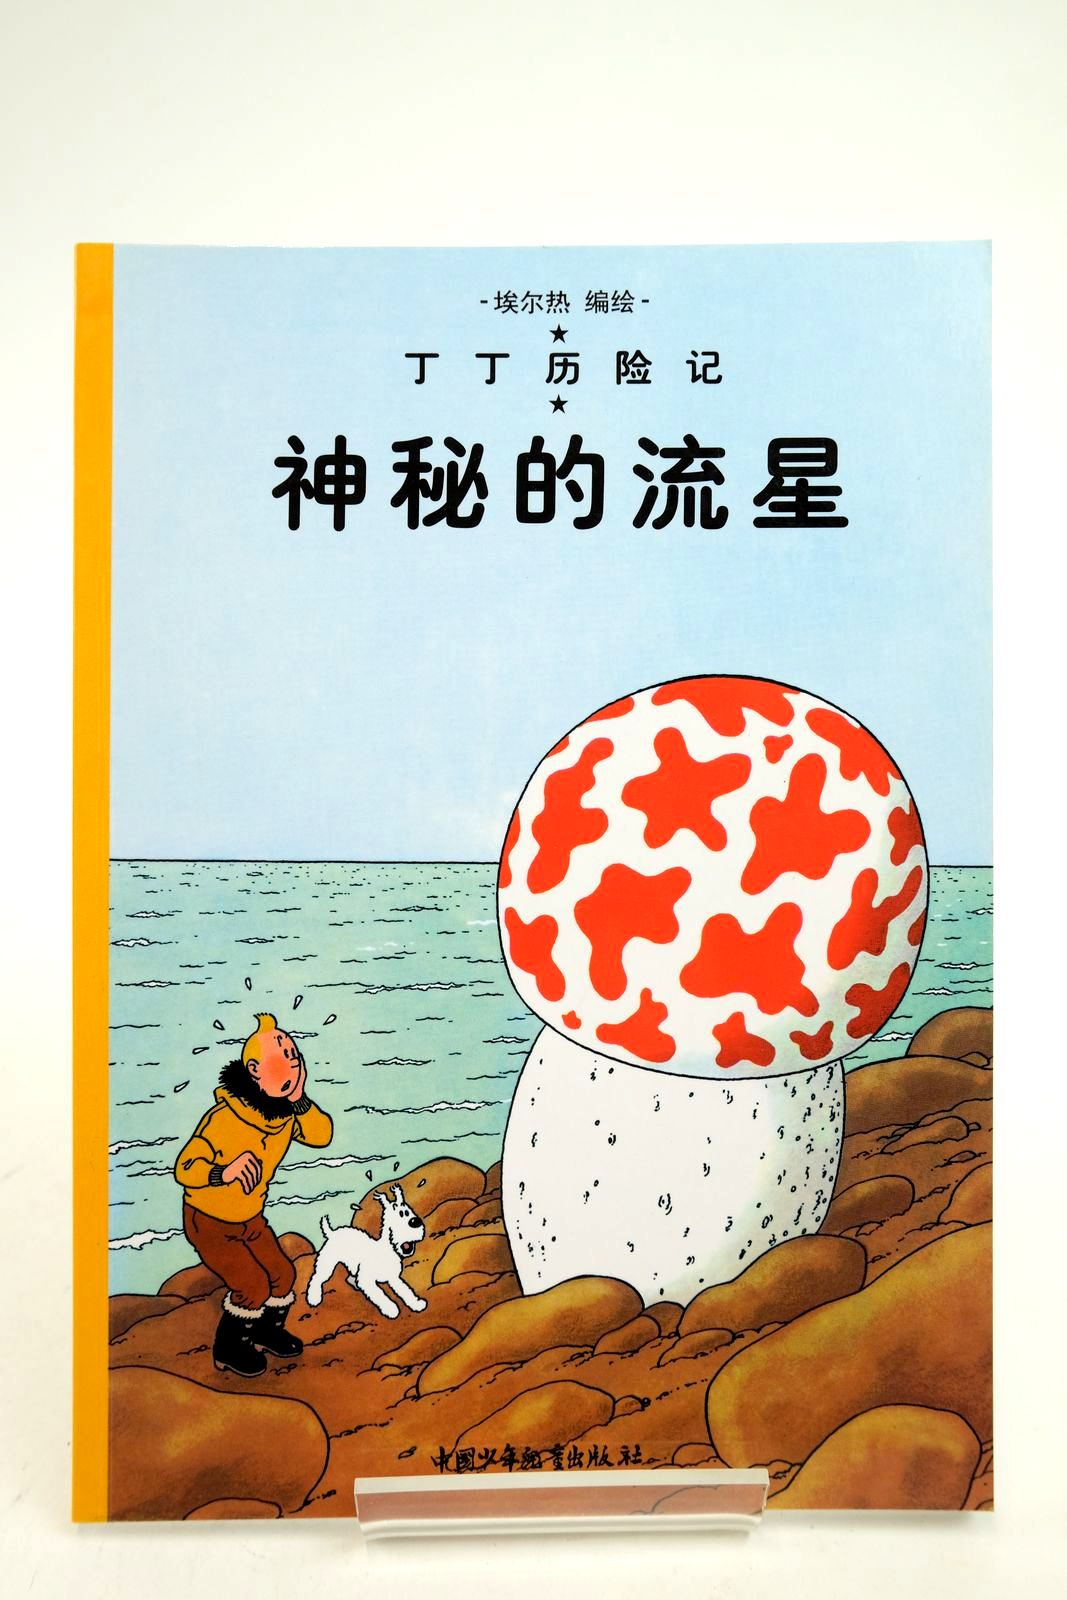 Photo of THE ADVENTURES OF TINTIN: THE SHOOTING STAR (CHINESE LANGUAGE EDITION) written by Herge, illustrated by Herge, published by China Press (STOCK CODE: 2140351)  for sale by Stella & Rose's Books